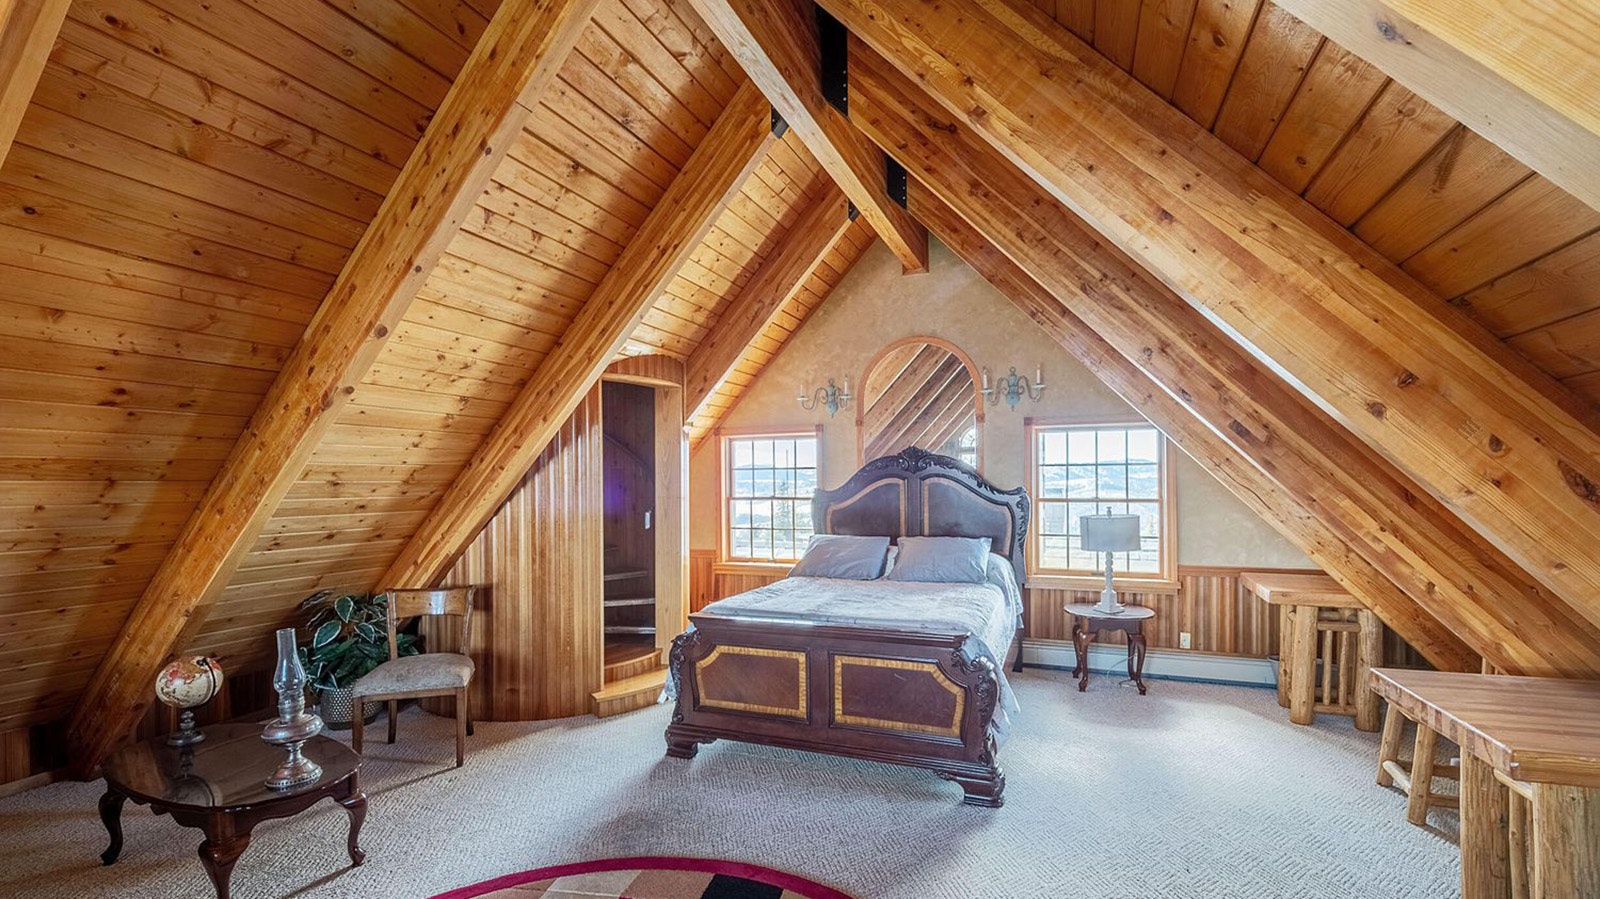 The exposes, rustic roofline makes for a cozy, Western bedroom.